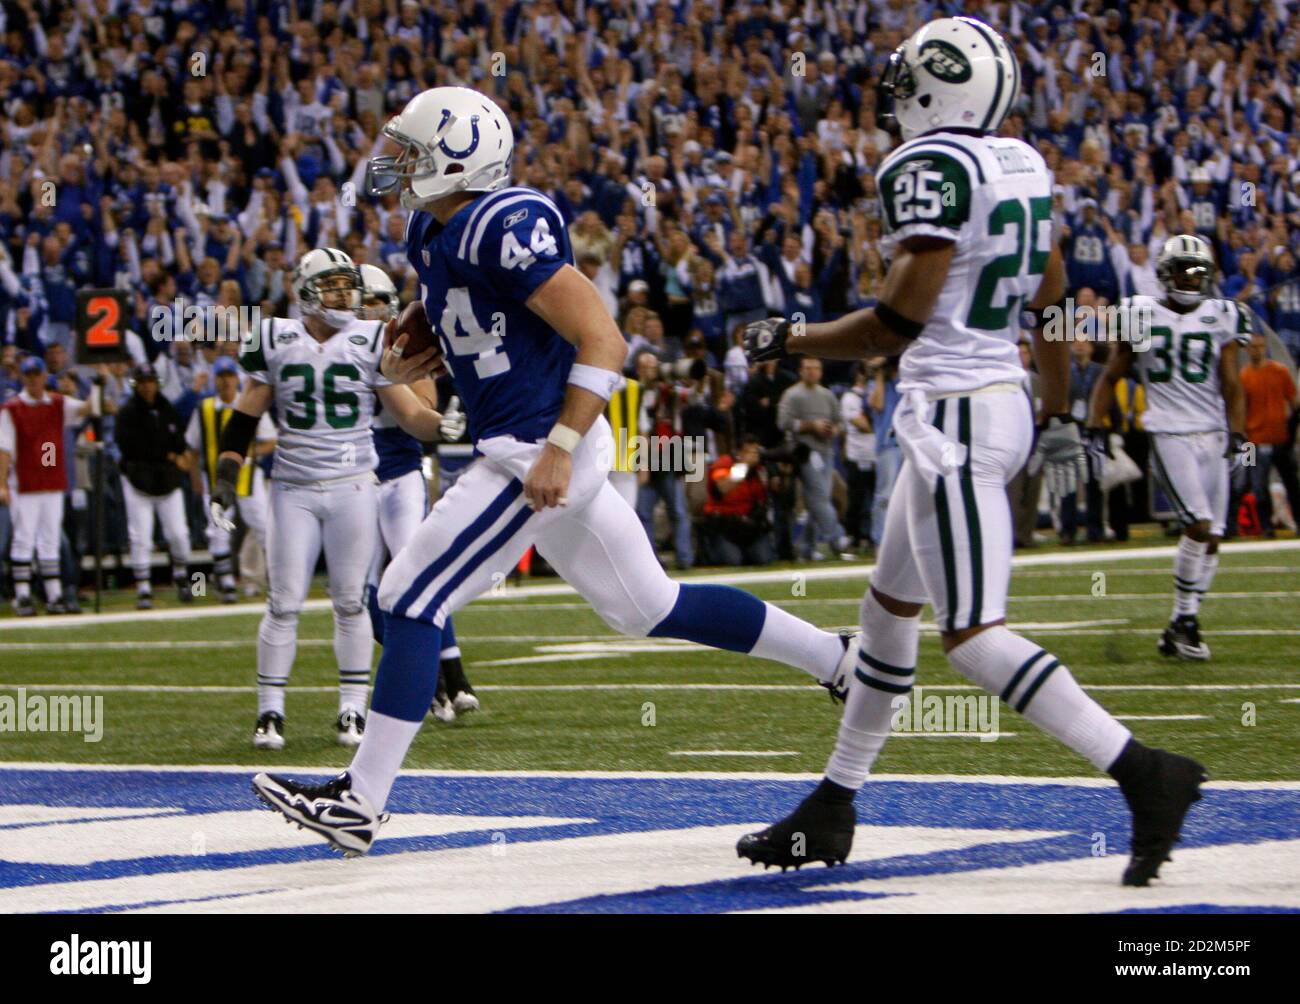 Klasseværelse akse sikkerhed Indianapolis Colts tight end Dallas Clark (44) scores on a touchdown pass  in front of New York Jets safety Kerry Rhodes (R) in the fourth quarter of  the NFL AFC Championship football